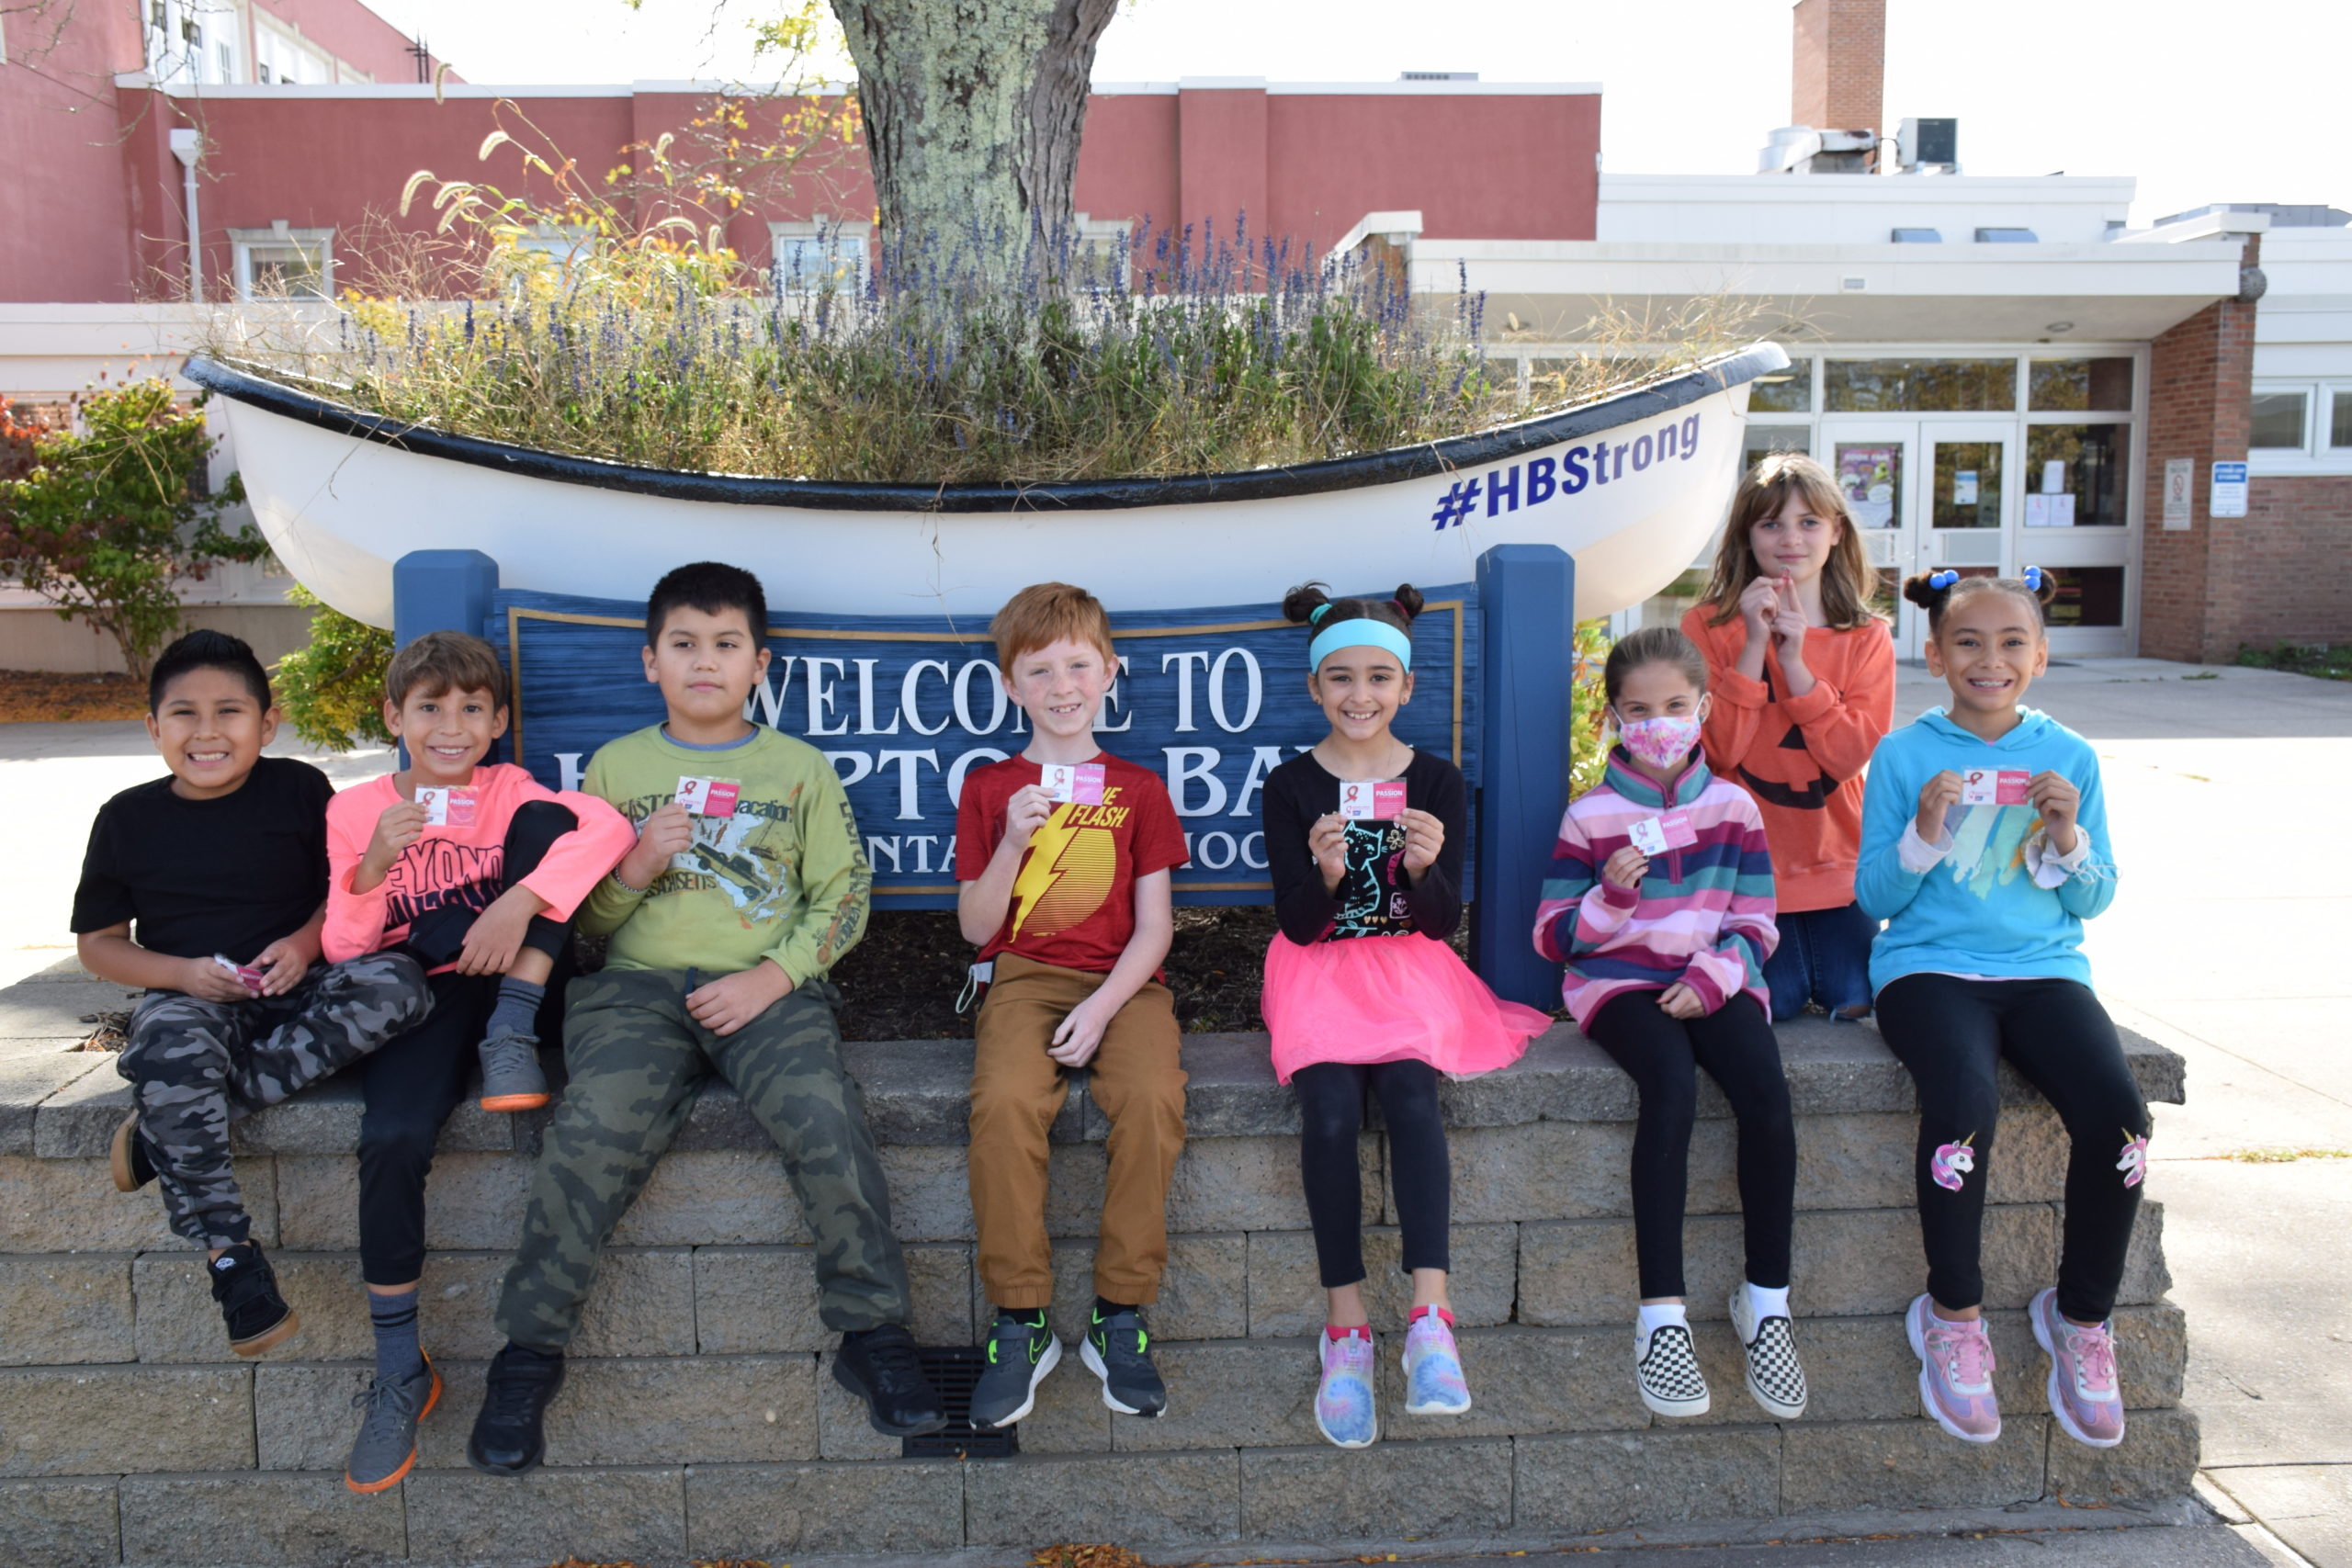 Members of the Hampton Bays Elementary School service organization, K-Kids, recently donated more than $500 to the American Cancer Society as part of their annual Denim Day fundraiser. They raised the funds by selling breast cancer awareness bracelets and pins to fellow students, teachers and administrators. Students and staff also wore jeans and the color pink on October 22 in honor of the cause.